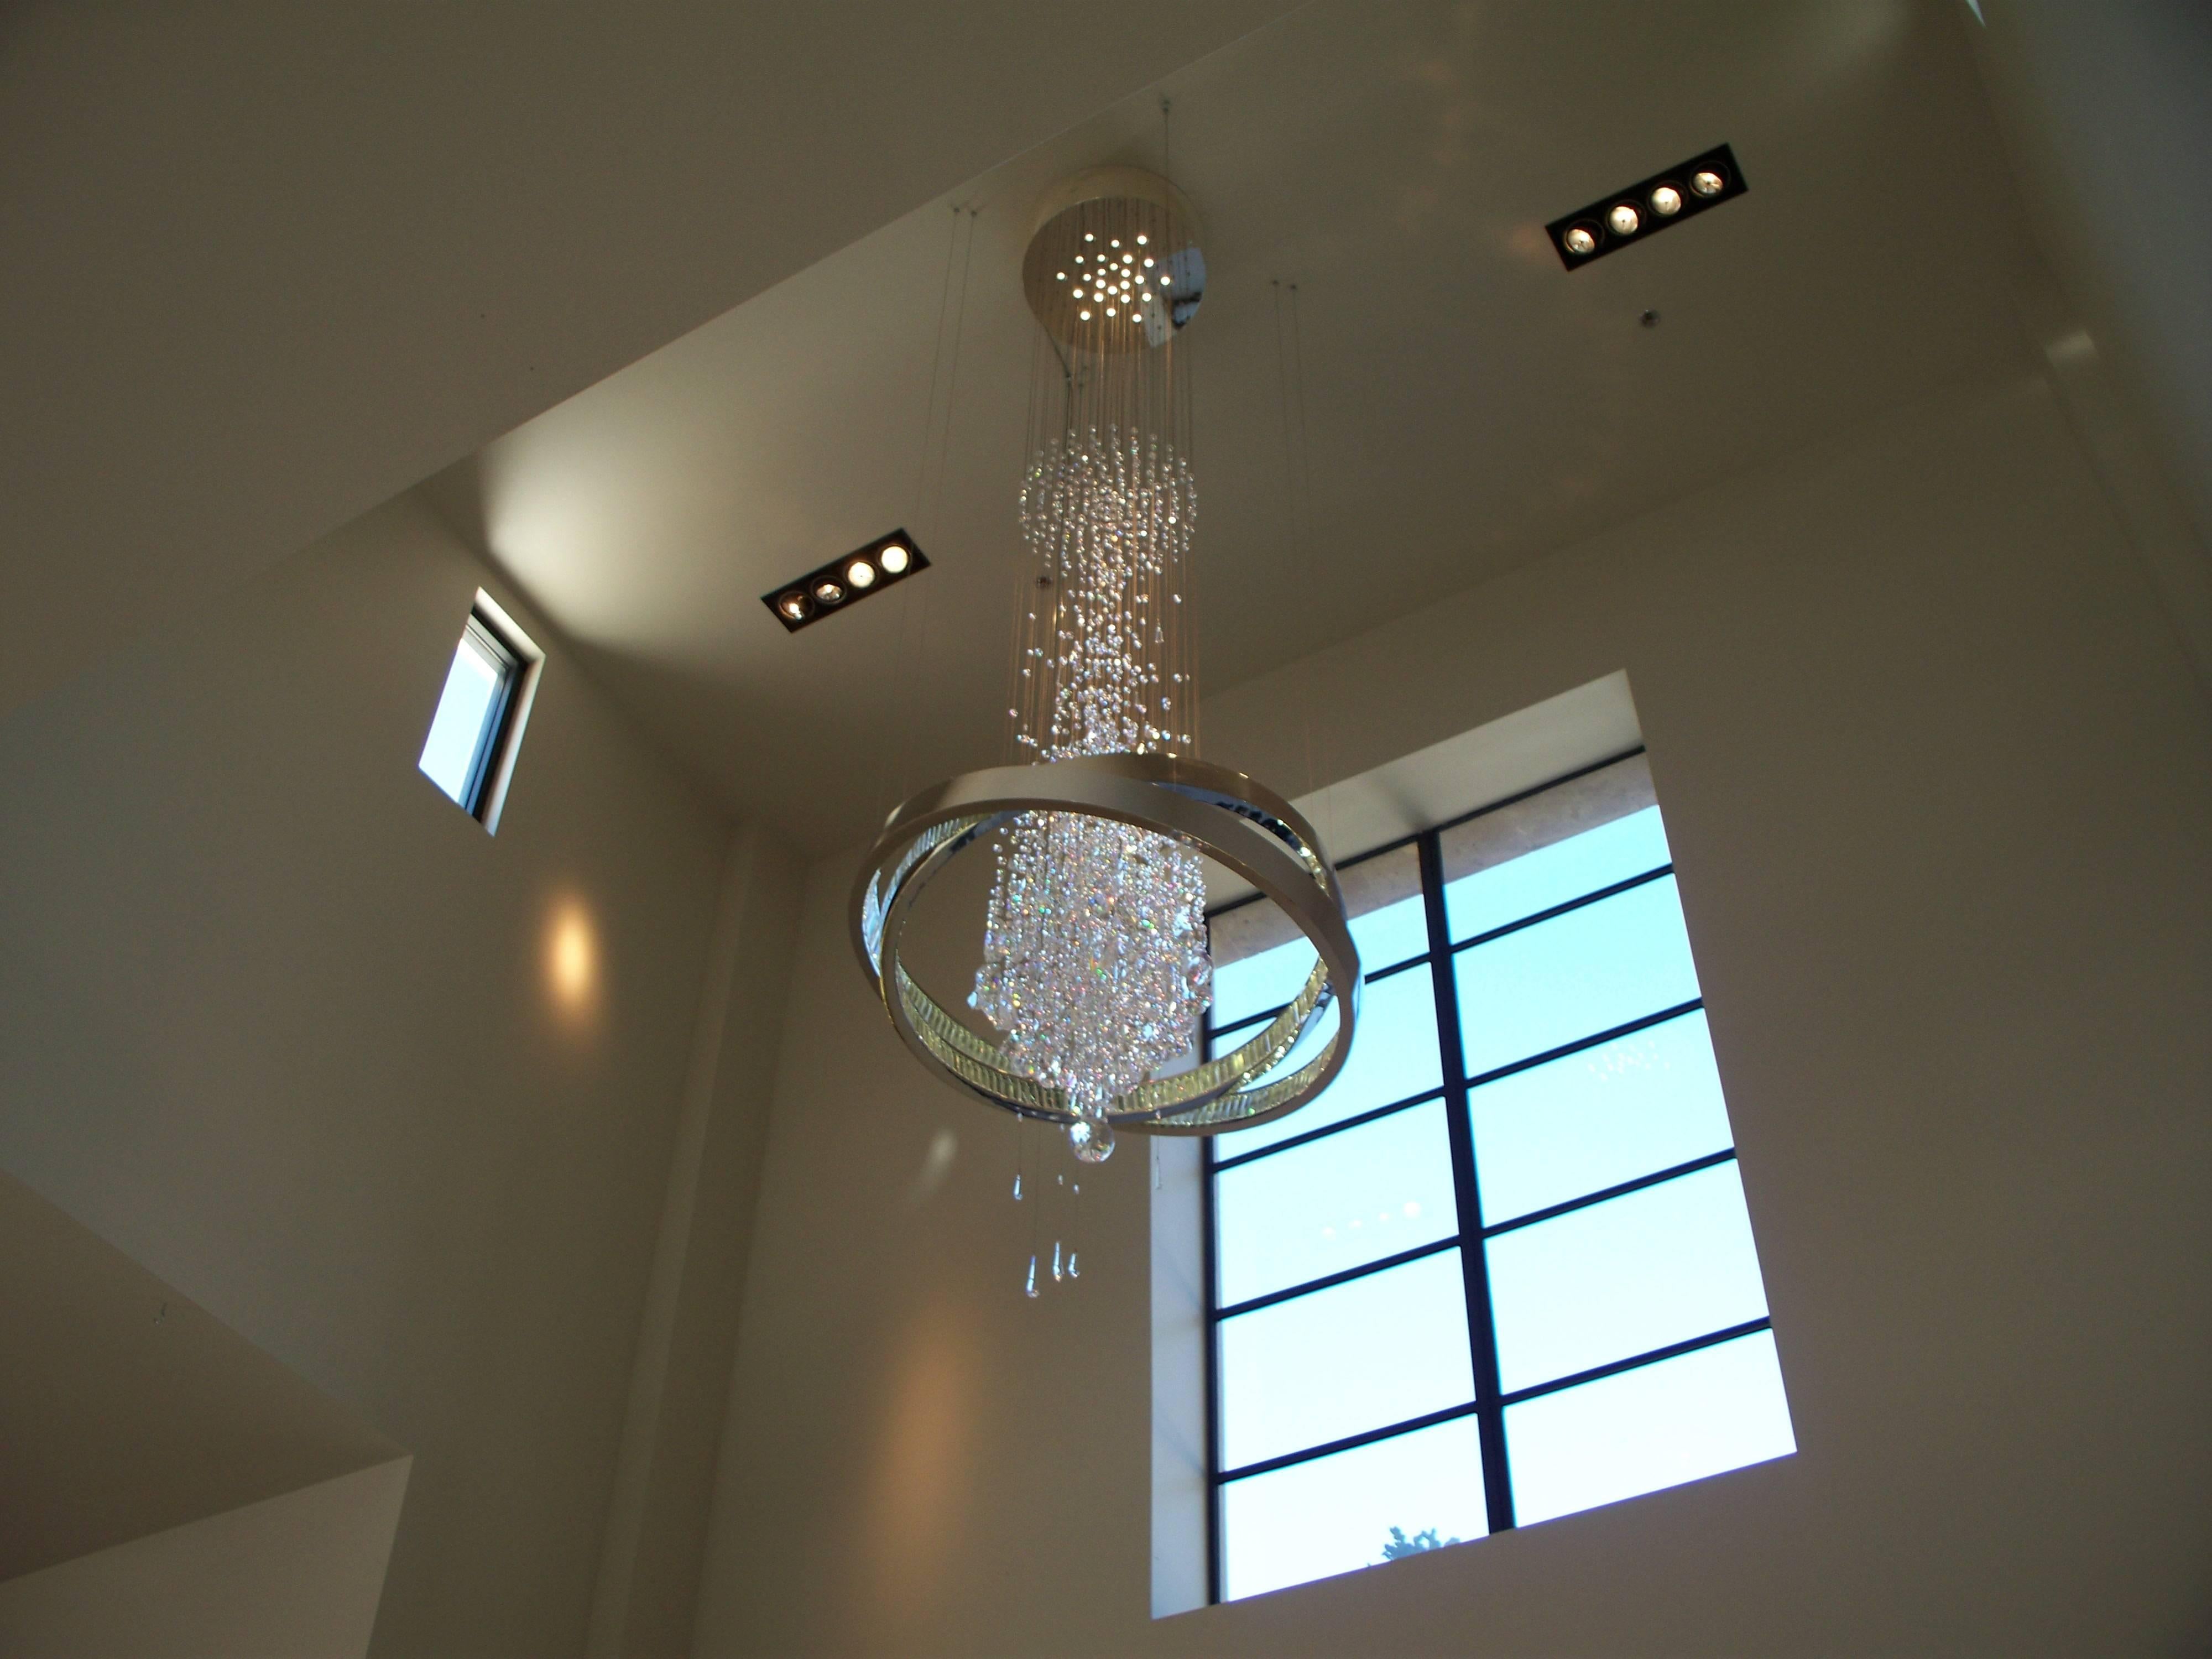 This extraordinarily tall chandelier is comprised of thousands of Swarovski crystals lit from above with halogen bulbs as well as crystal baguettes lining the circles of polished nickel that surround the cascade of crystals all suspended from a